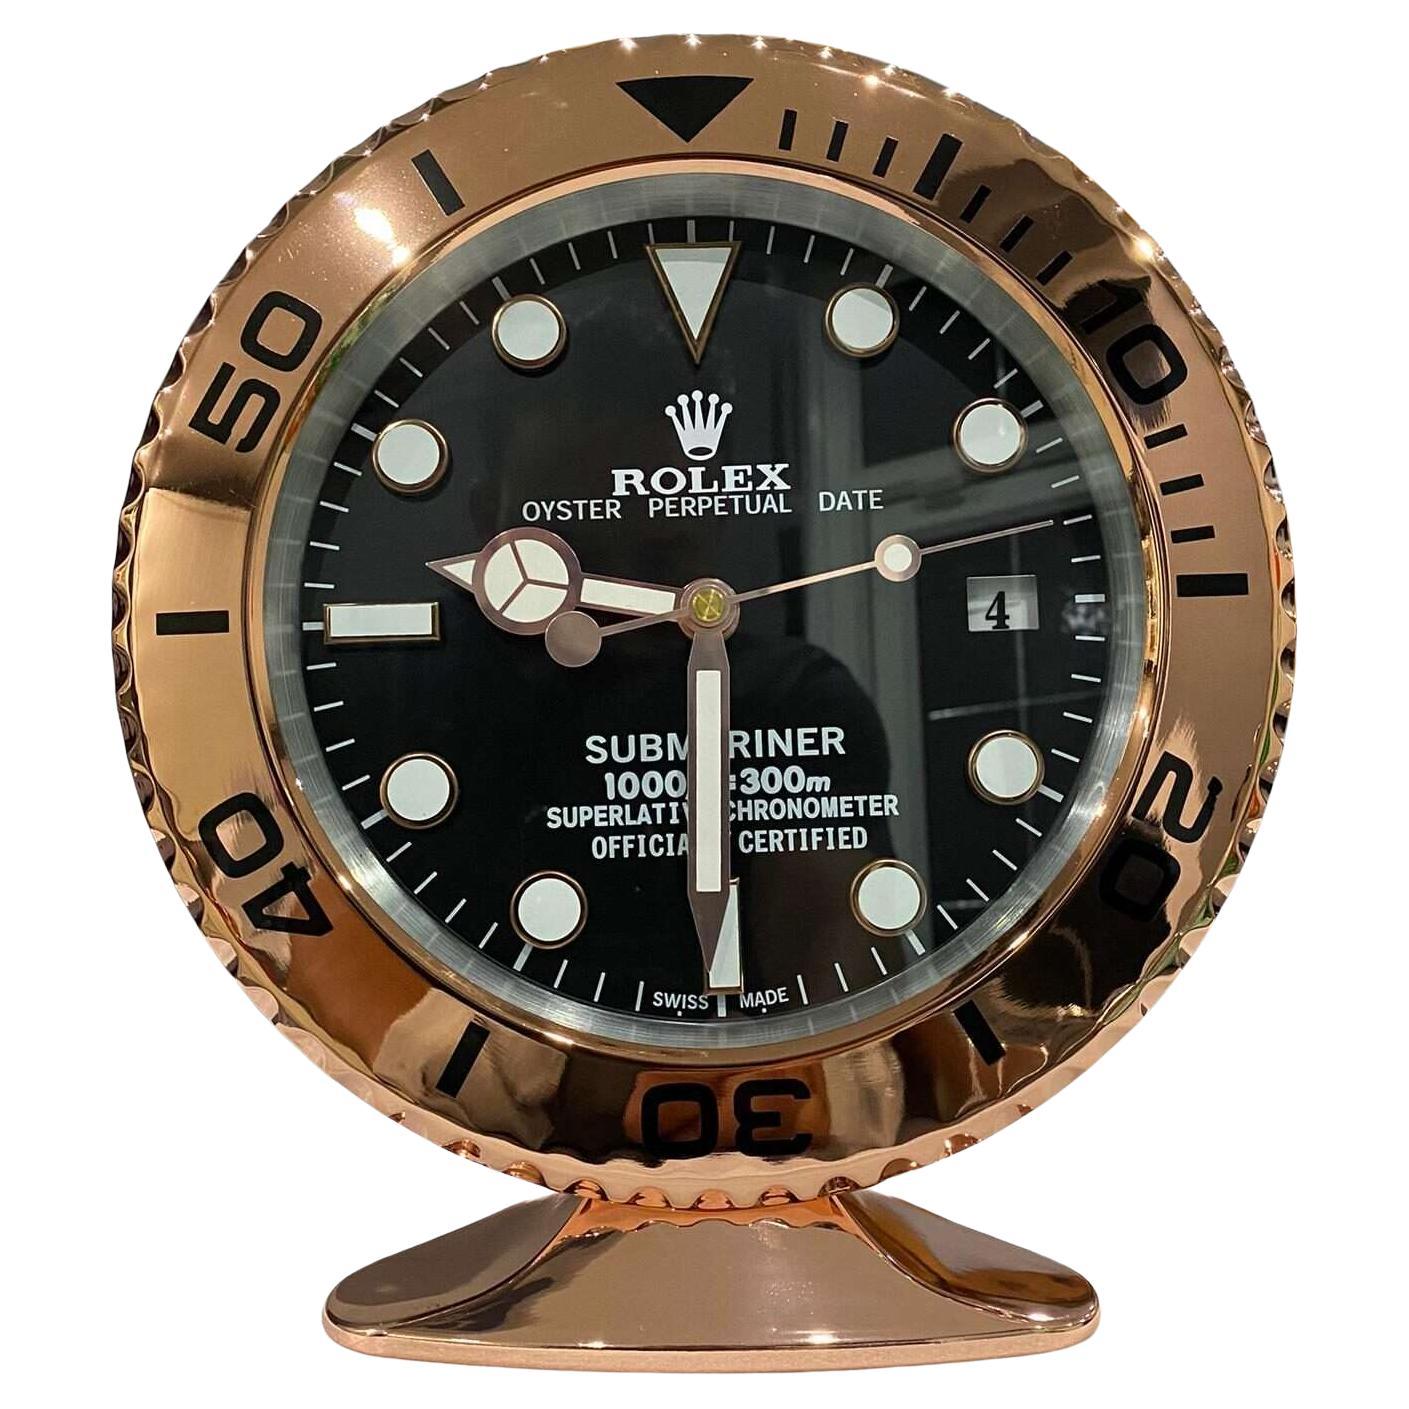 ROLEX Officially Certified Oyster Perpetual Submariner Rose Gold Desk Clock  For Sale